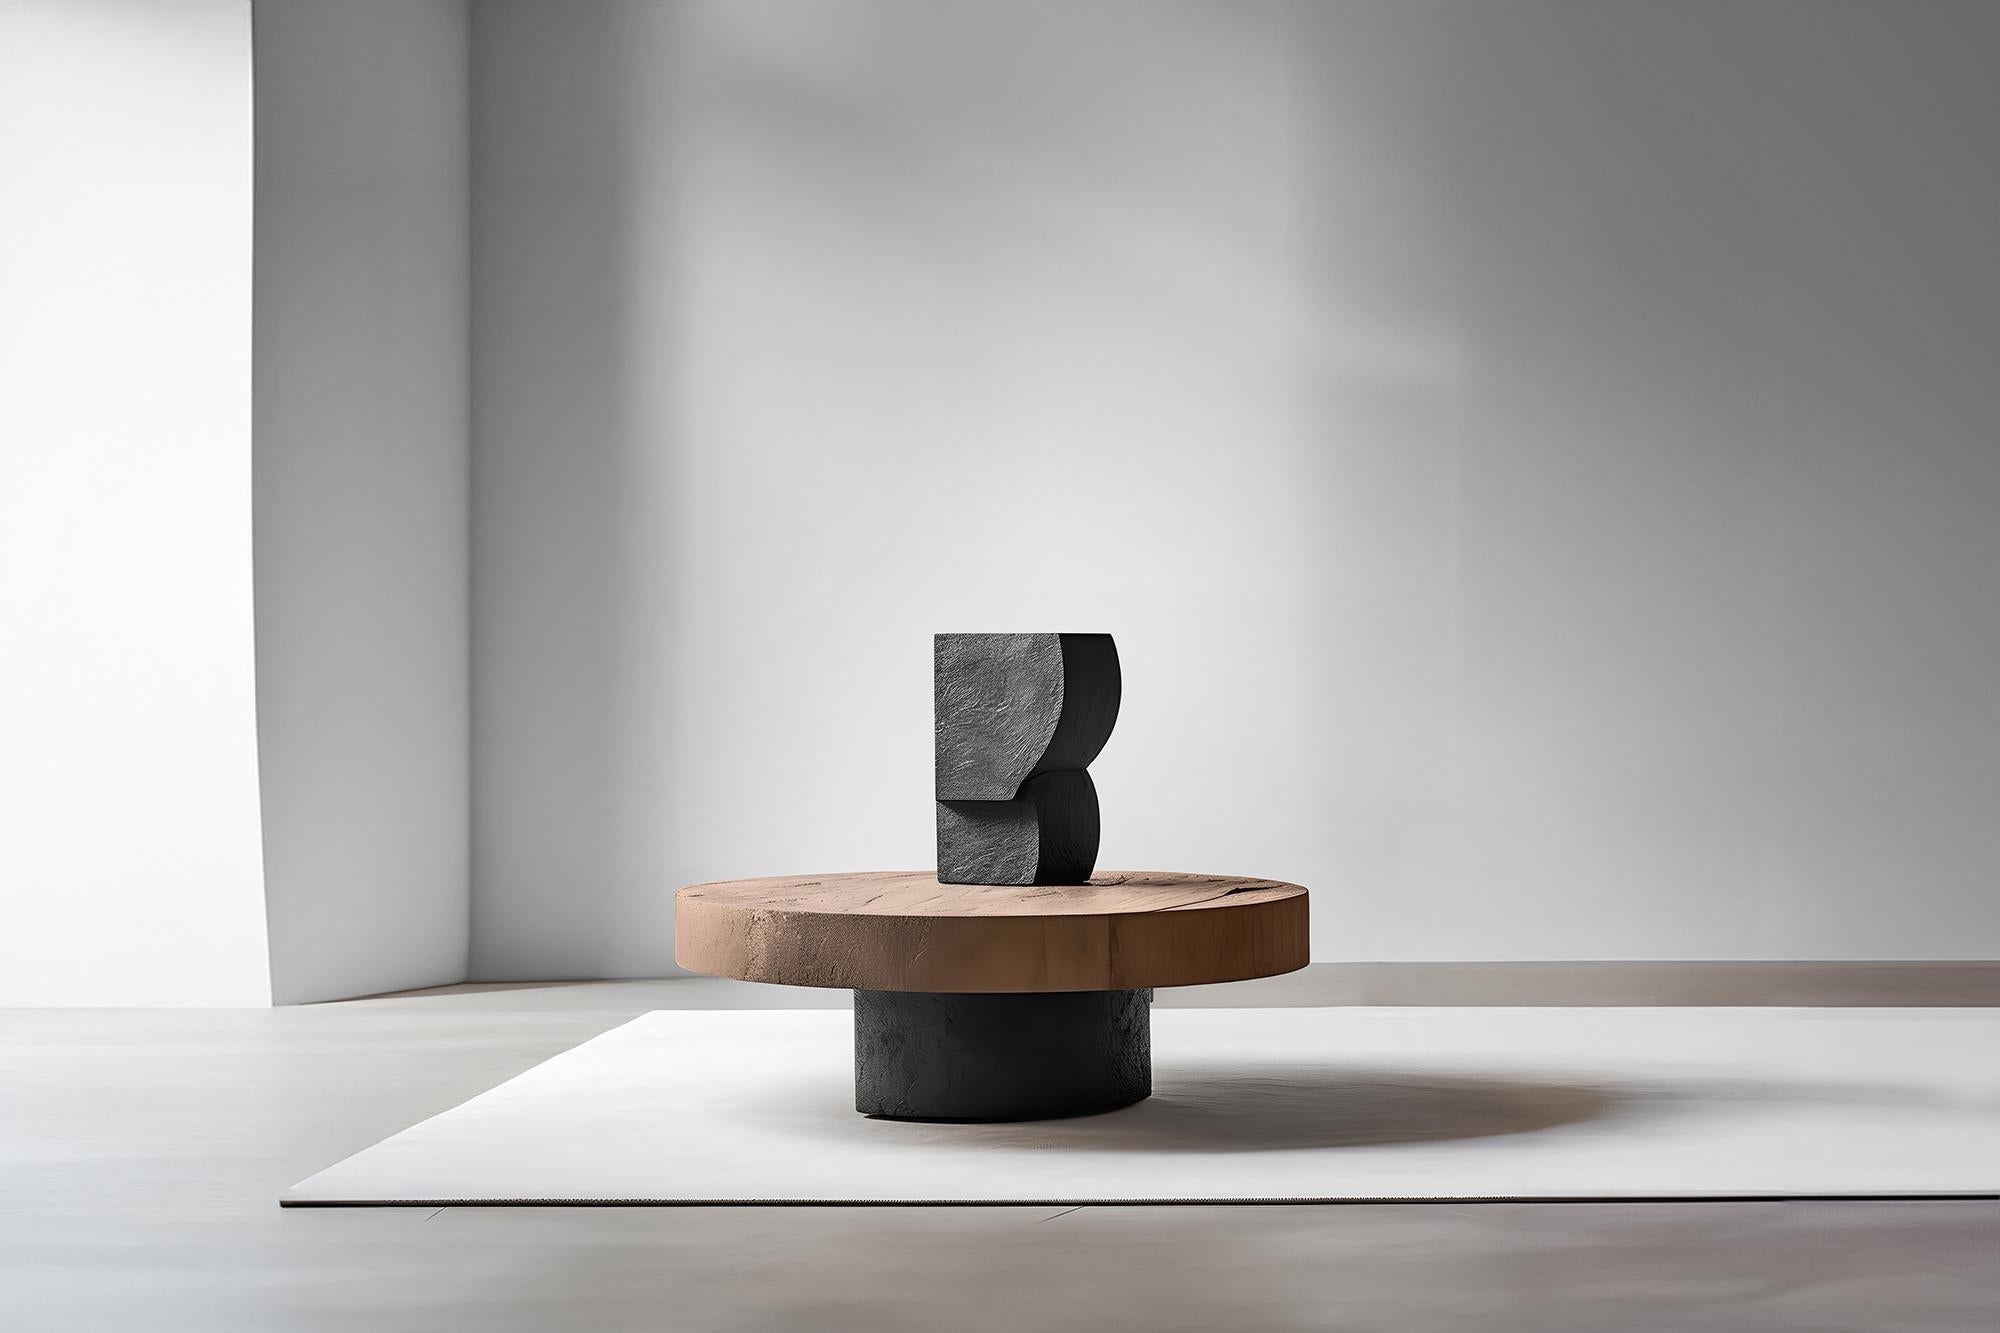 Unseen Force #38 Solid Oak Coffee Table, Joel Escalona's Art Piece


Sculptural coffee table made of solid wood with a natural water-based or carbonized finish. Due to the nature of the production process, each piece may vary in grain, texture,